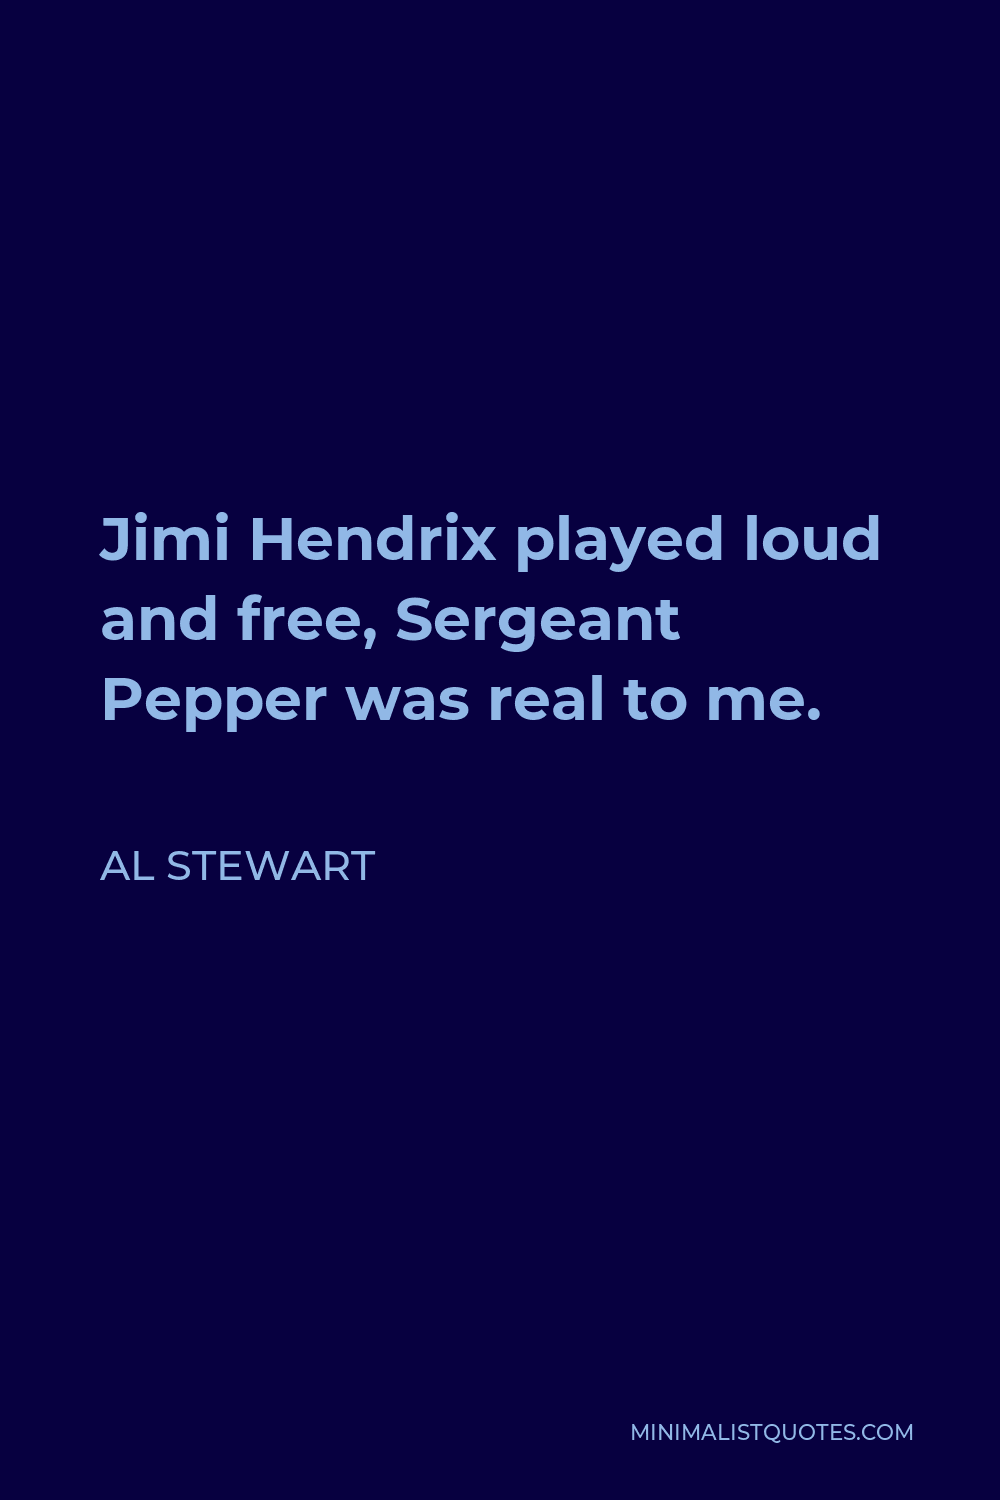 Al Stewart Quote - Jimi Hendrix played loud and free, Sergeant Pepper was real to me.